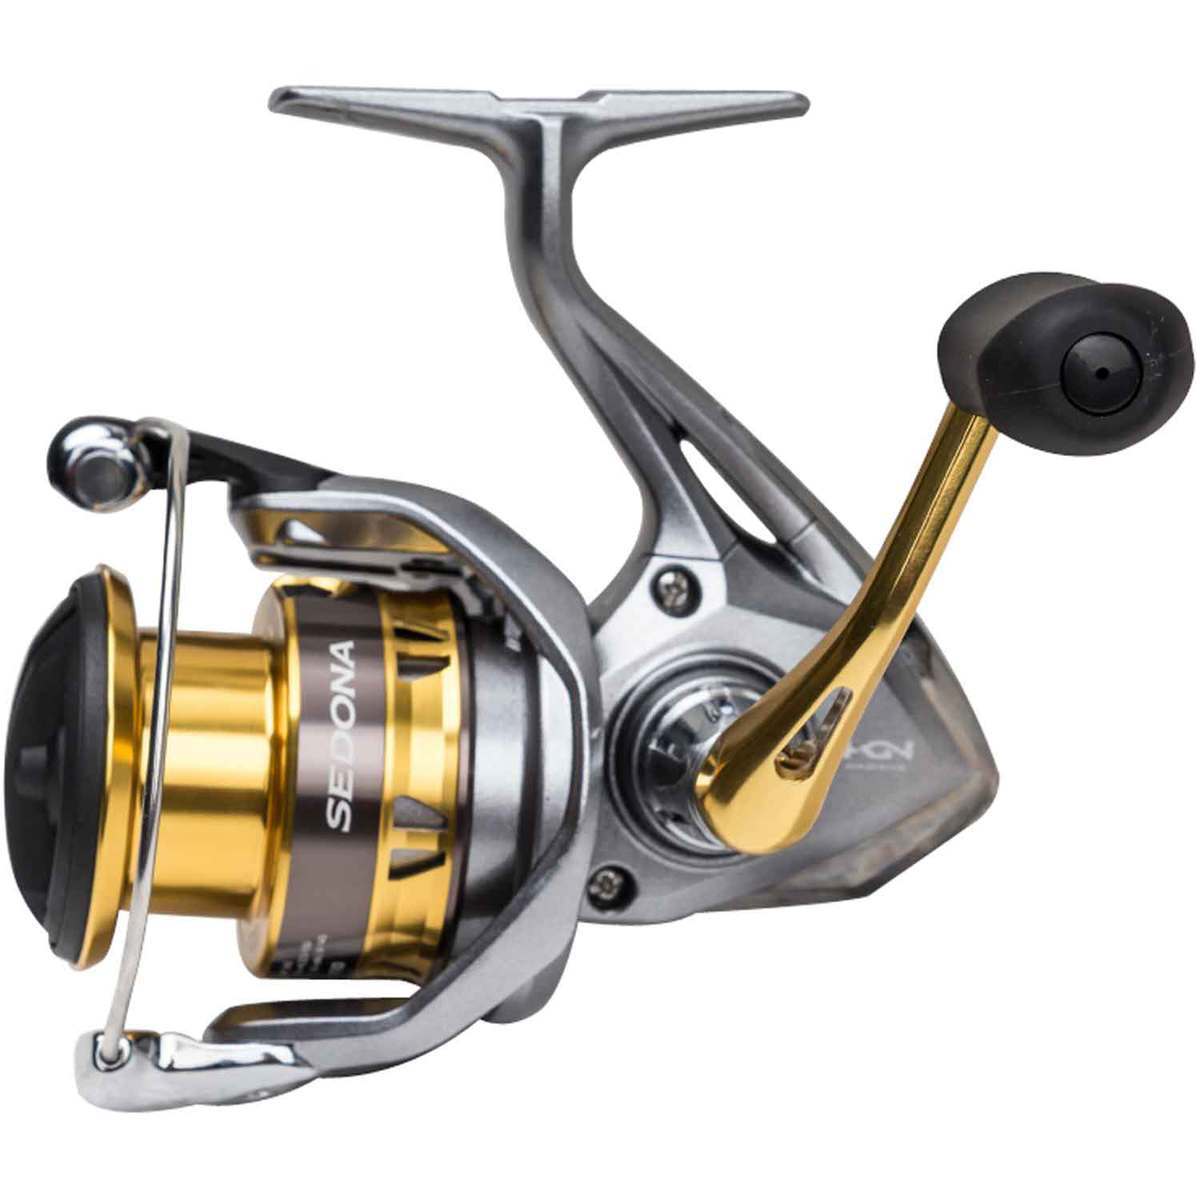 shimano-sedona-fi-spinning-reel-size-2500-clam-pack-2500